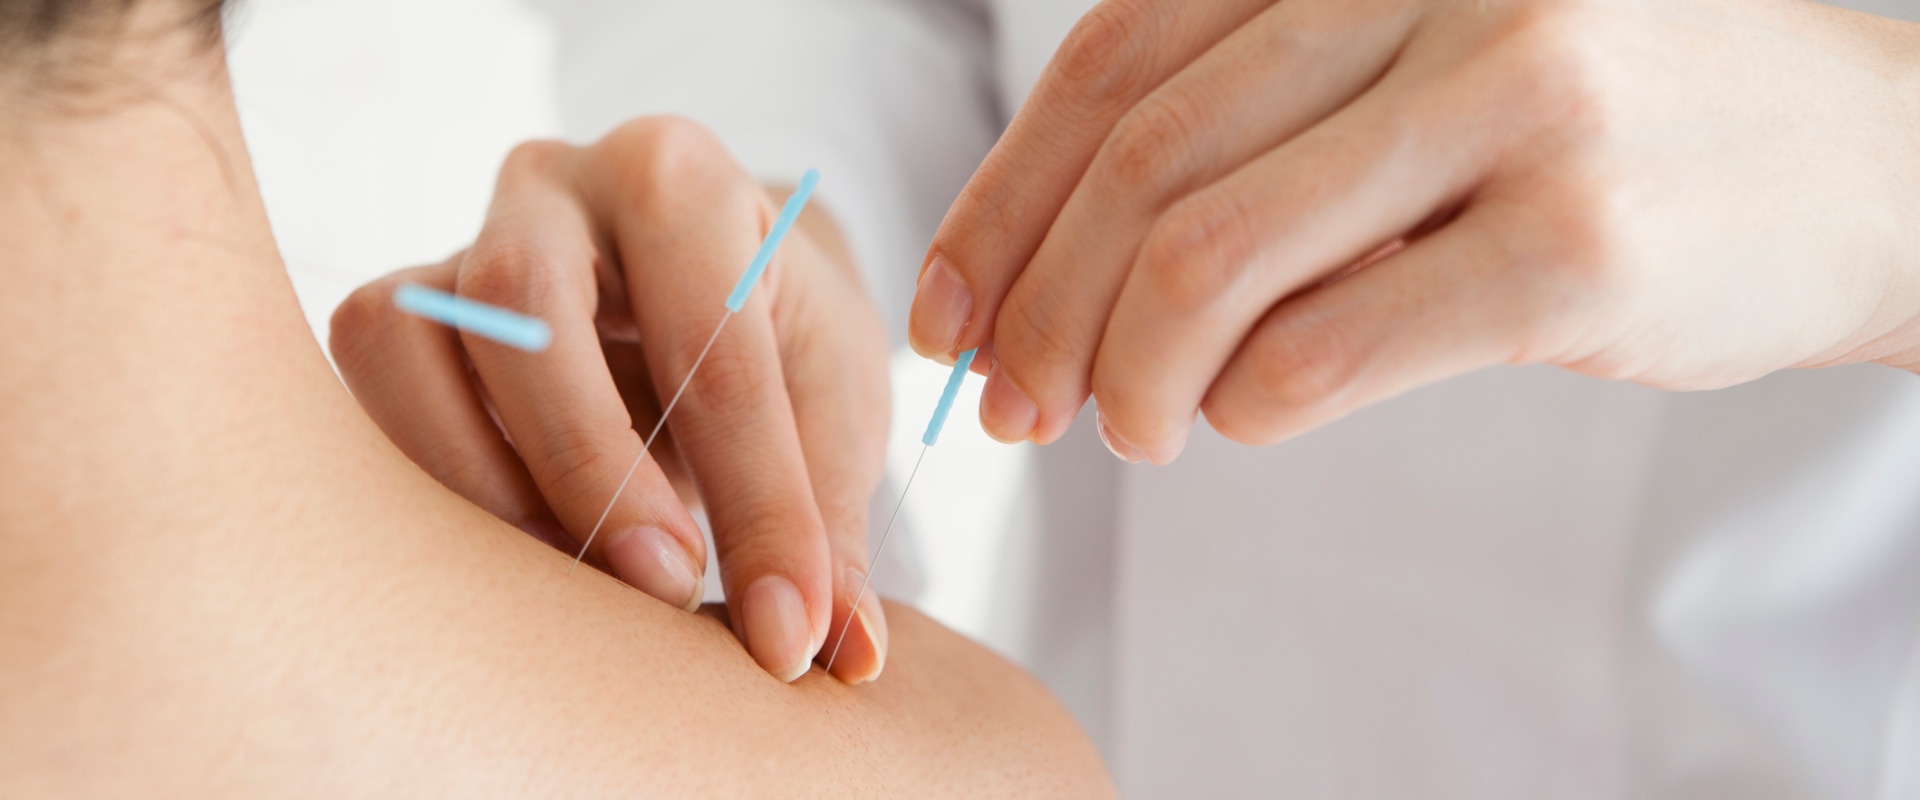 What Health Problems Can Acupuncture Solve?